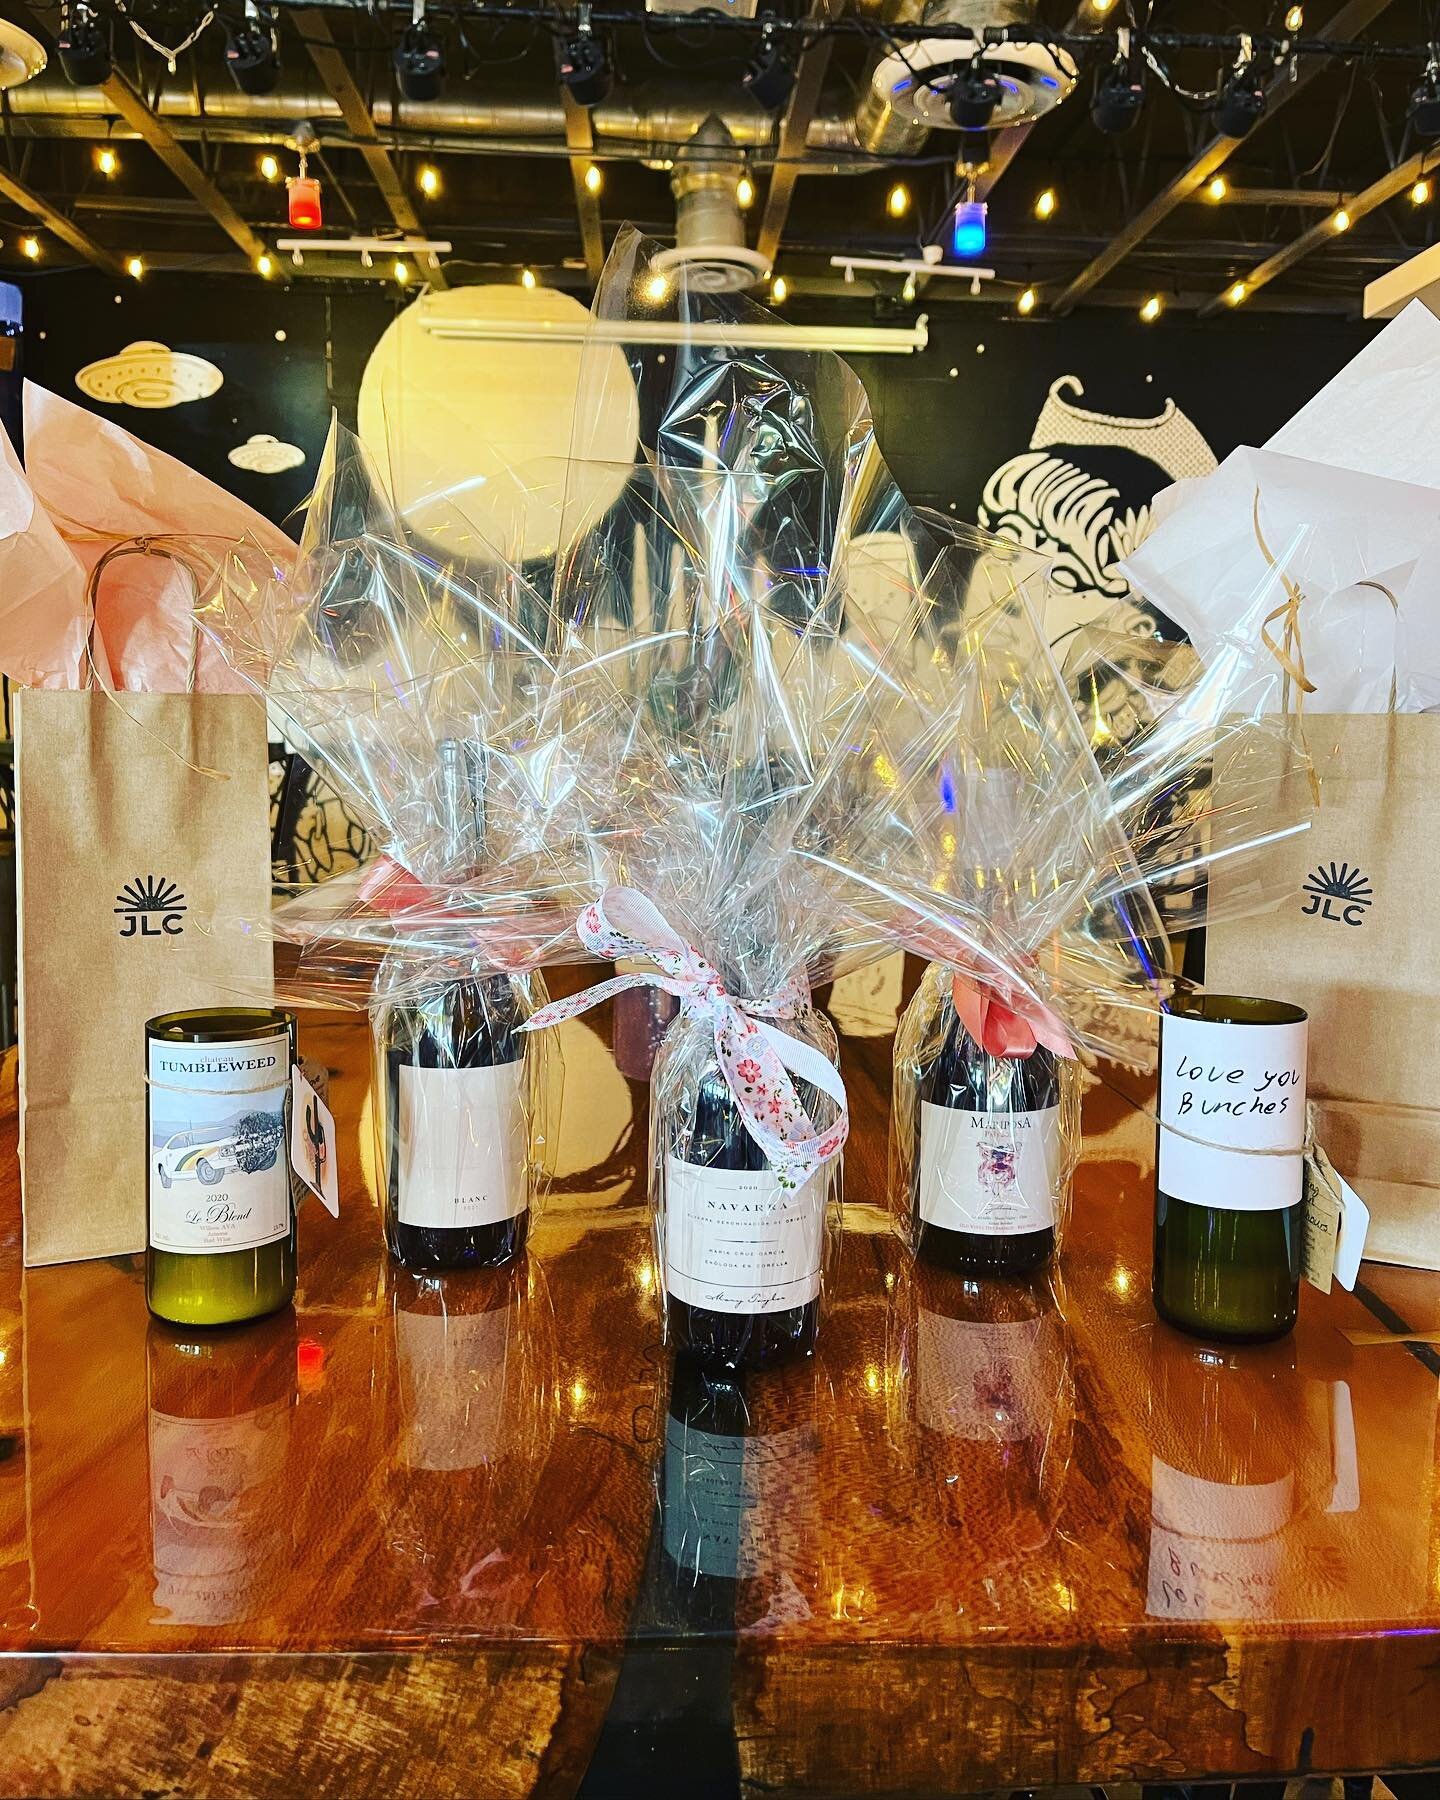 Mama wants wine! Stop in to grab Mother&rsquo;s Day goodies + we&rsquo;ll take care of the wrapping 🍷🎁💐 We also have some lovely candles from @cactus.vine for sale. This Sunday, draw a bubble bath, light a candle and pour that hard working mother 